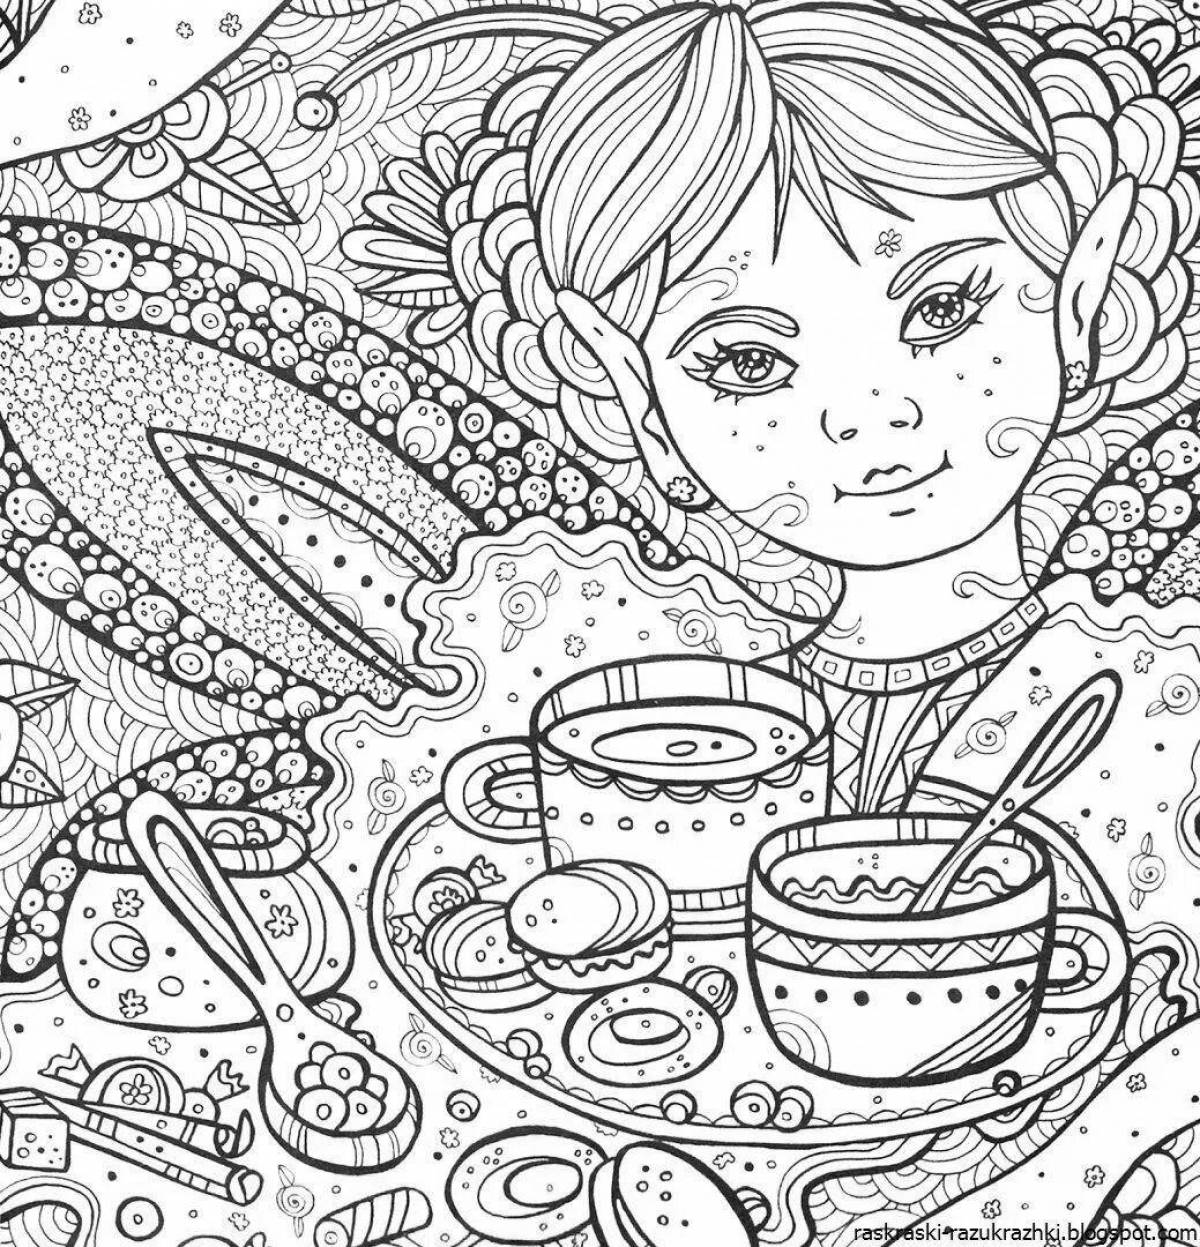 Exquisite coloring book for girls 9 years old